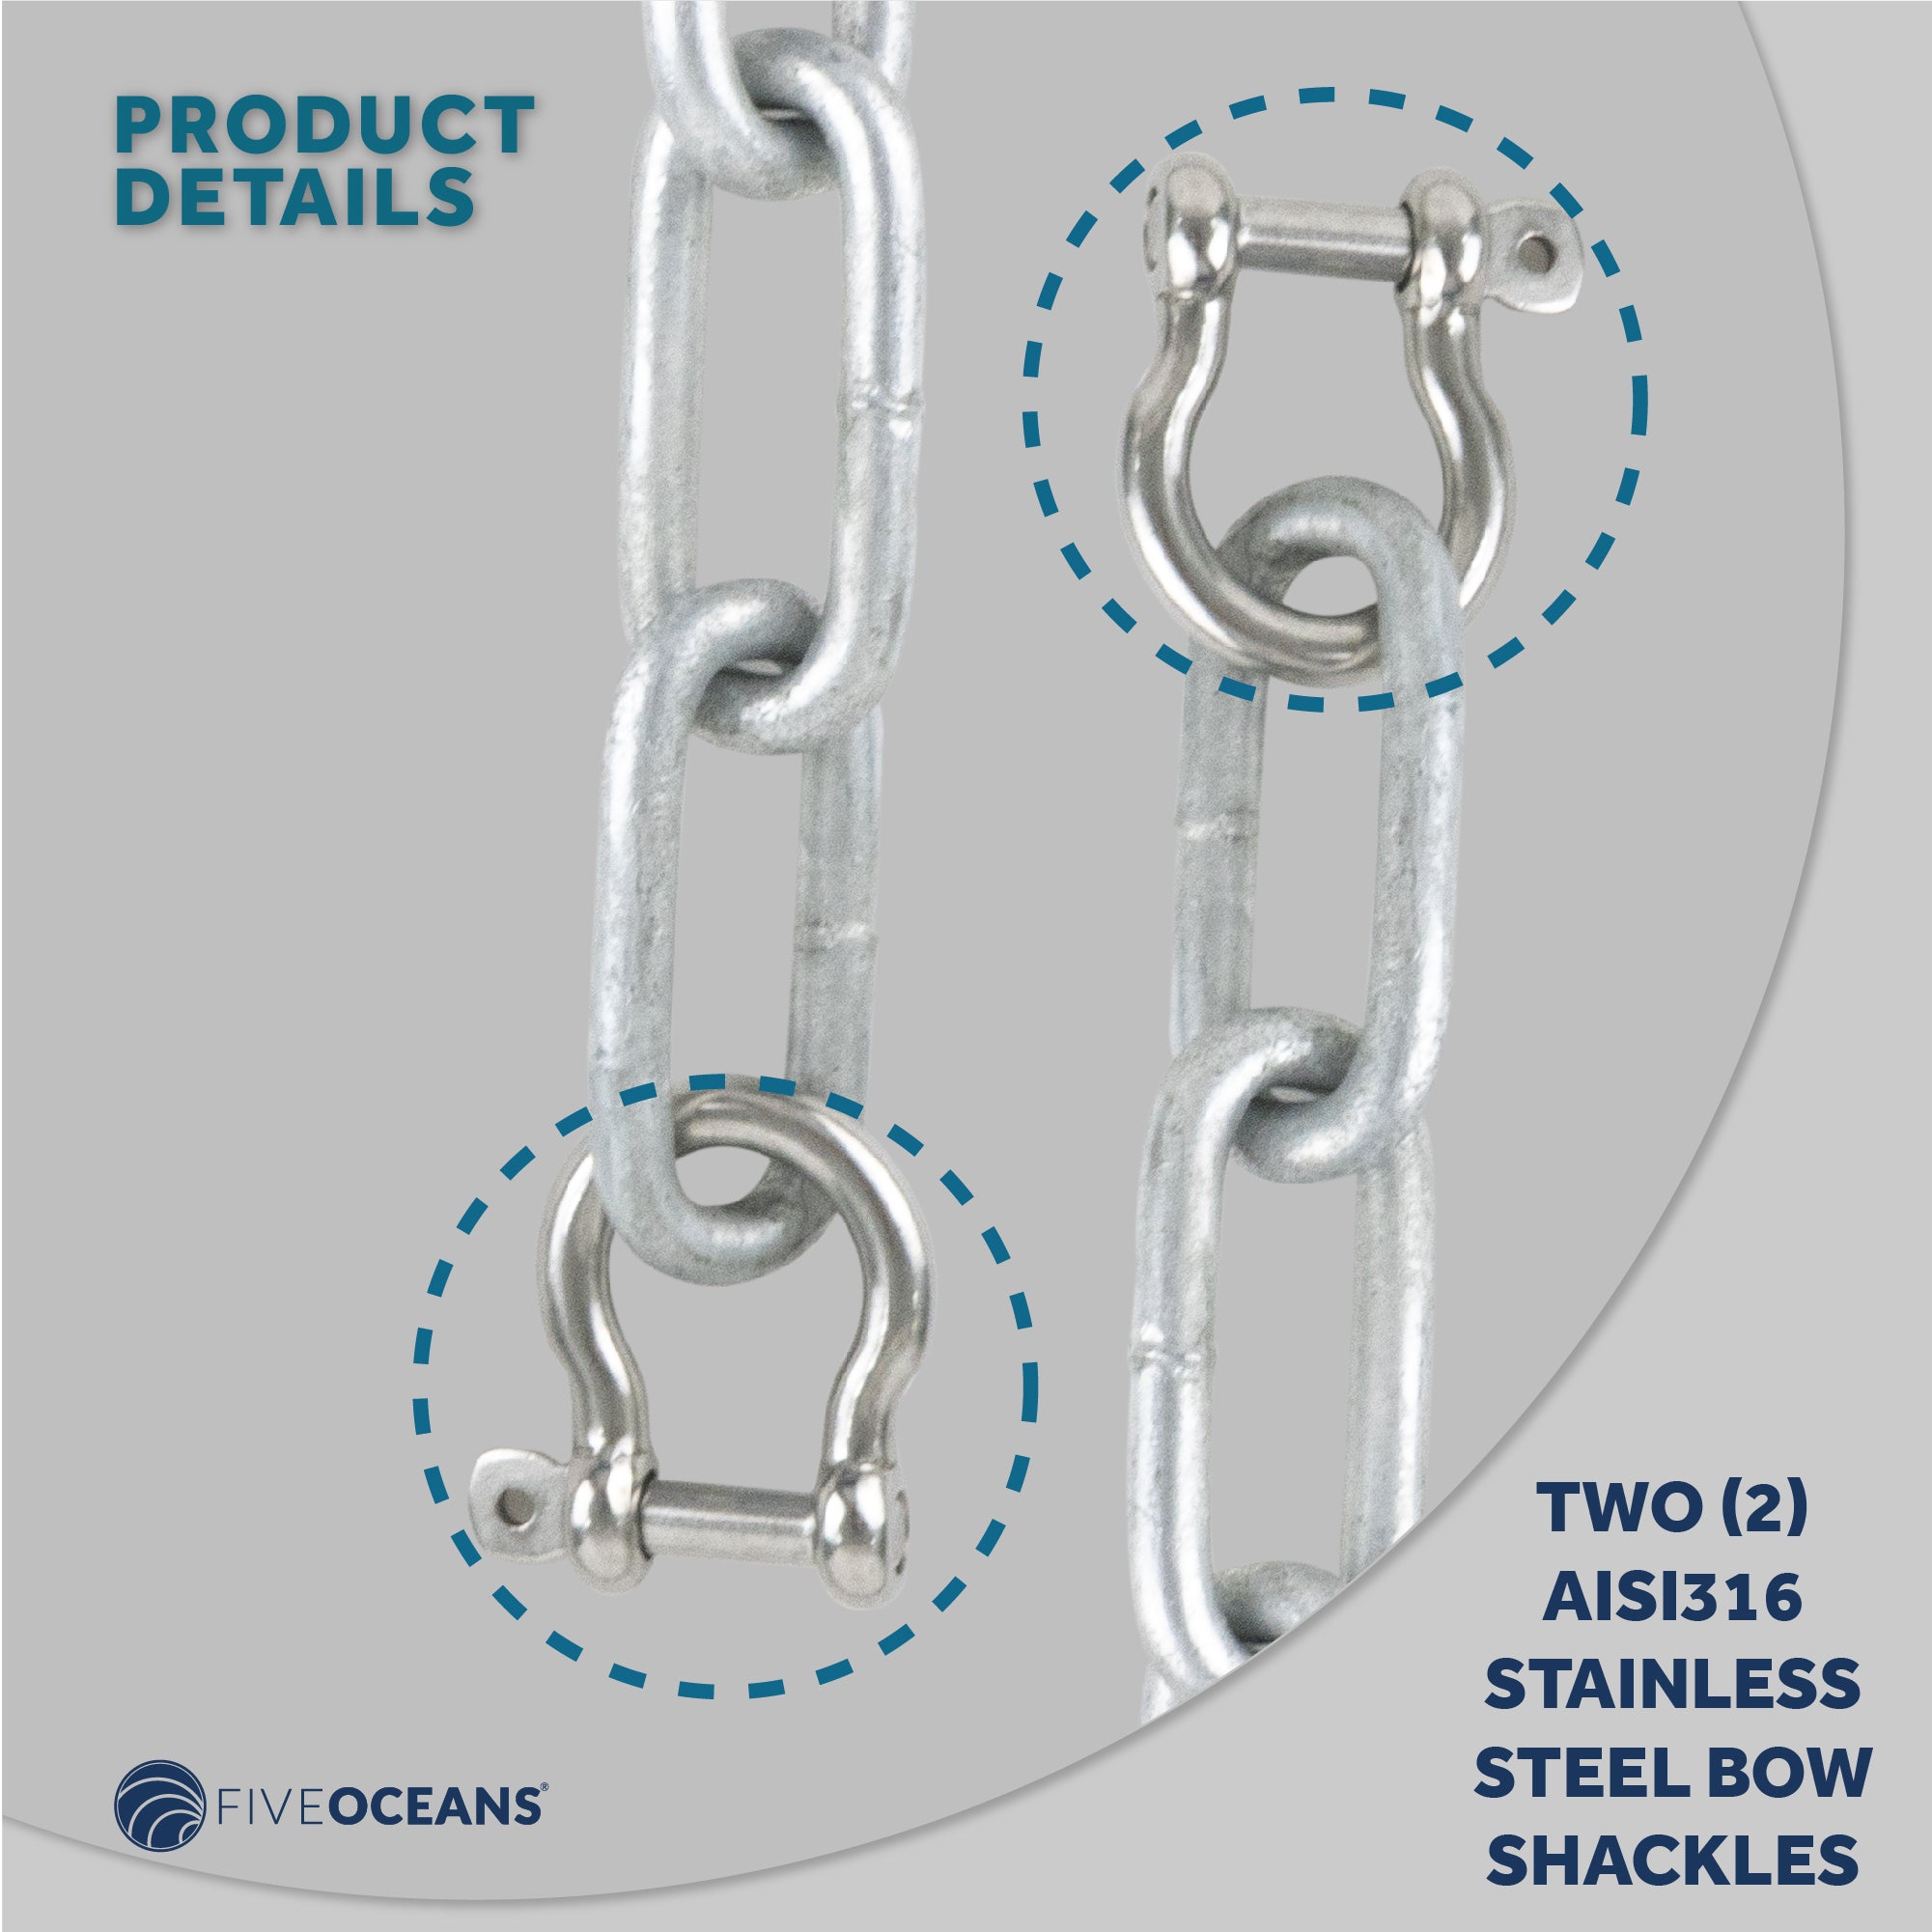 Marine Boat Anchor Lead Chain 1/4 inches x 15 Feet Hot-Dipped Galvanized Steel with 2 AISI316 Stainless Steel 1/4 inches Bow Shackles FO4568-GN15